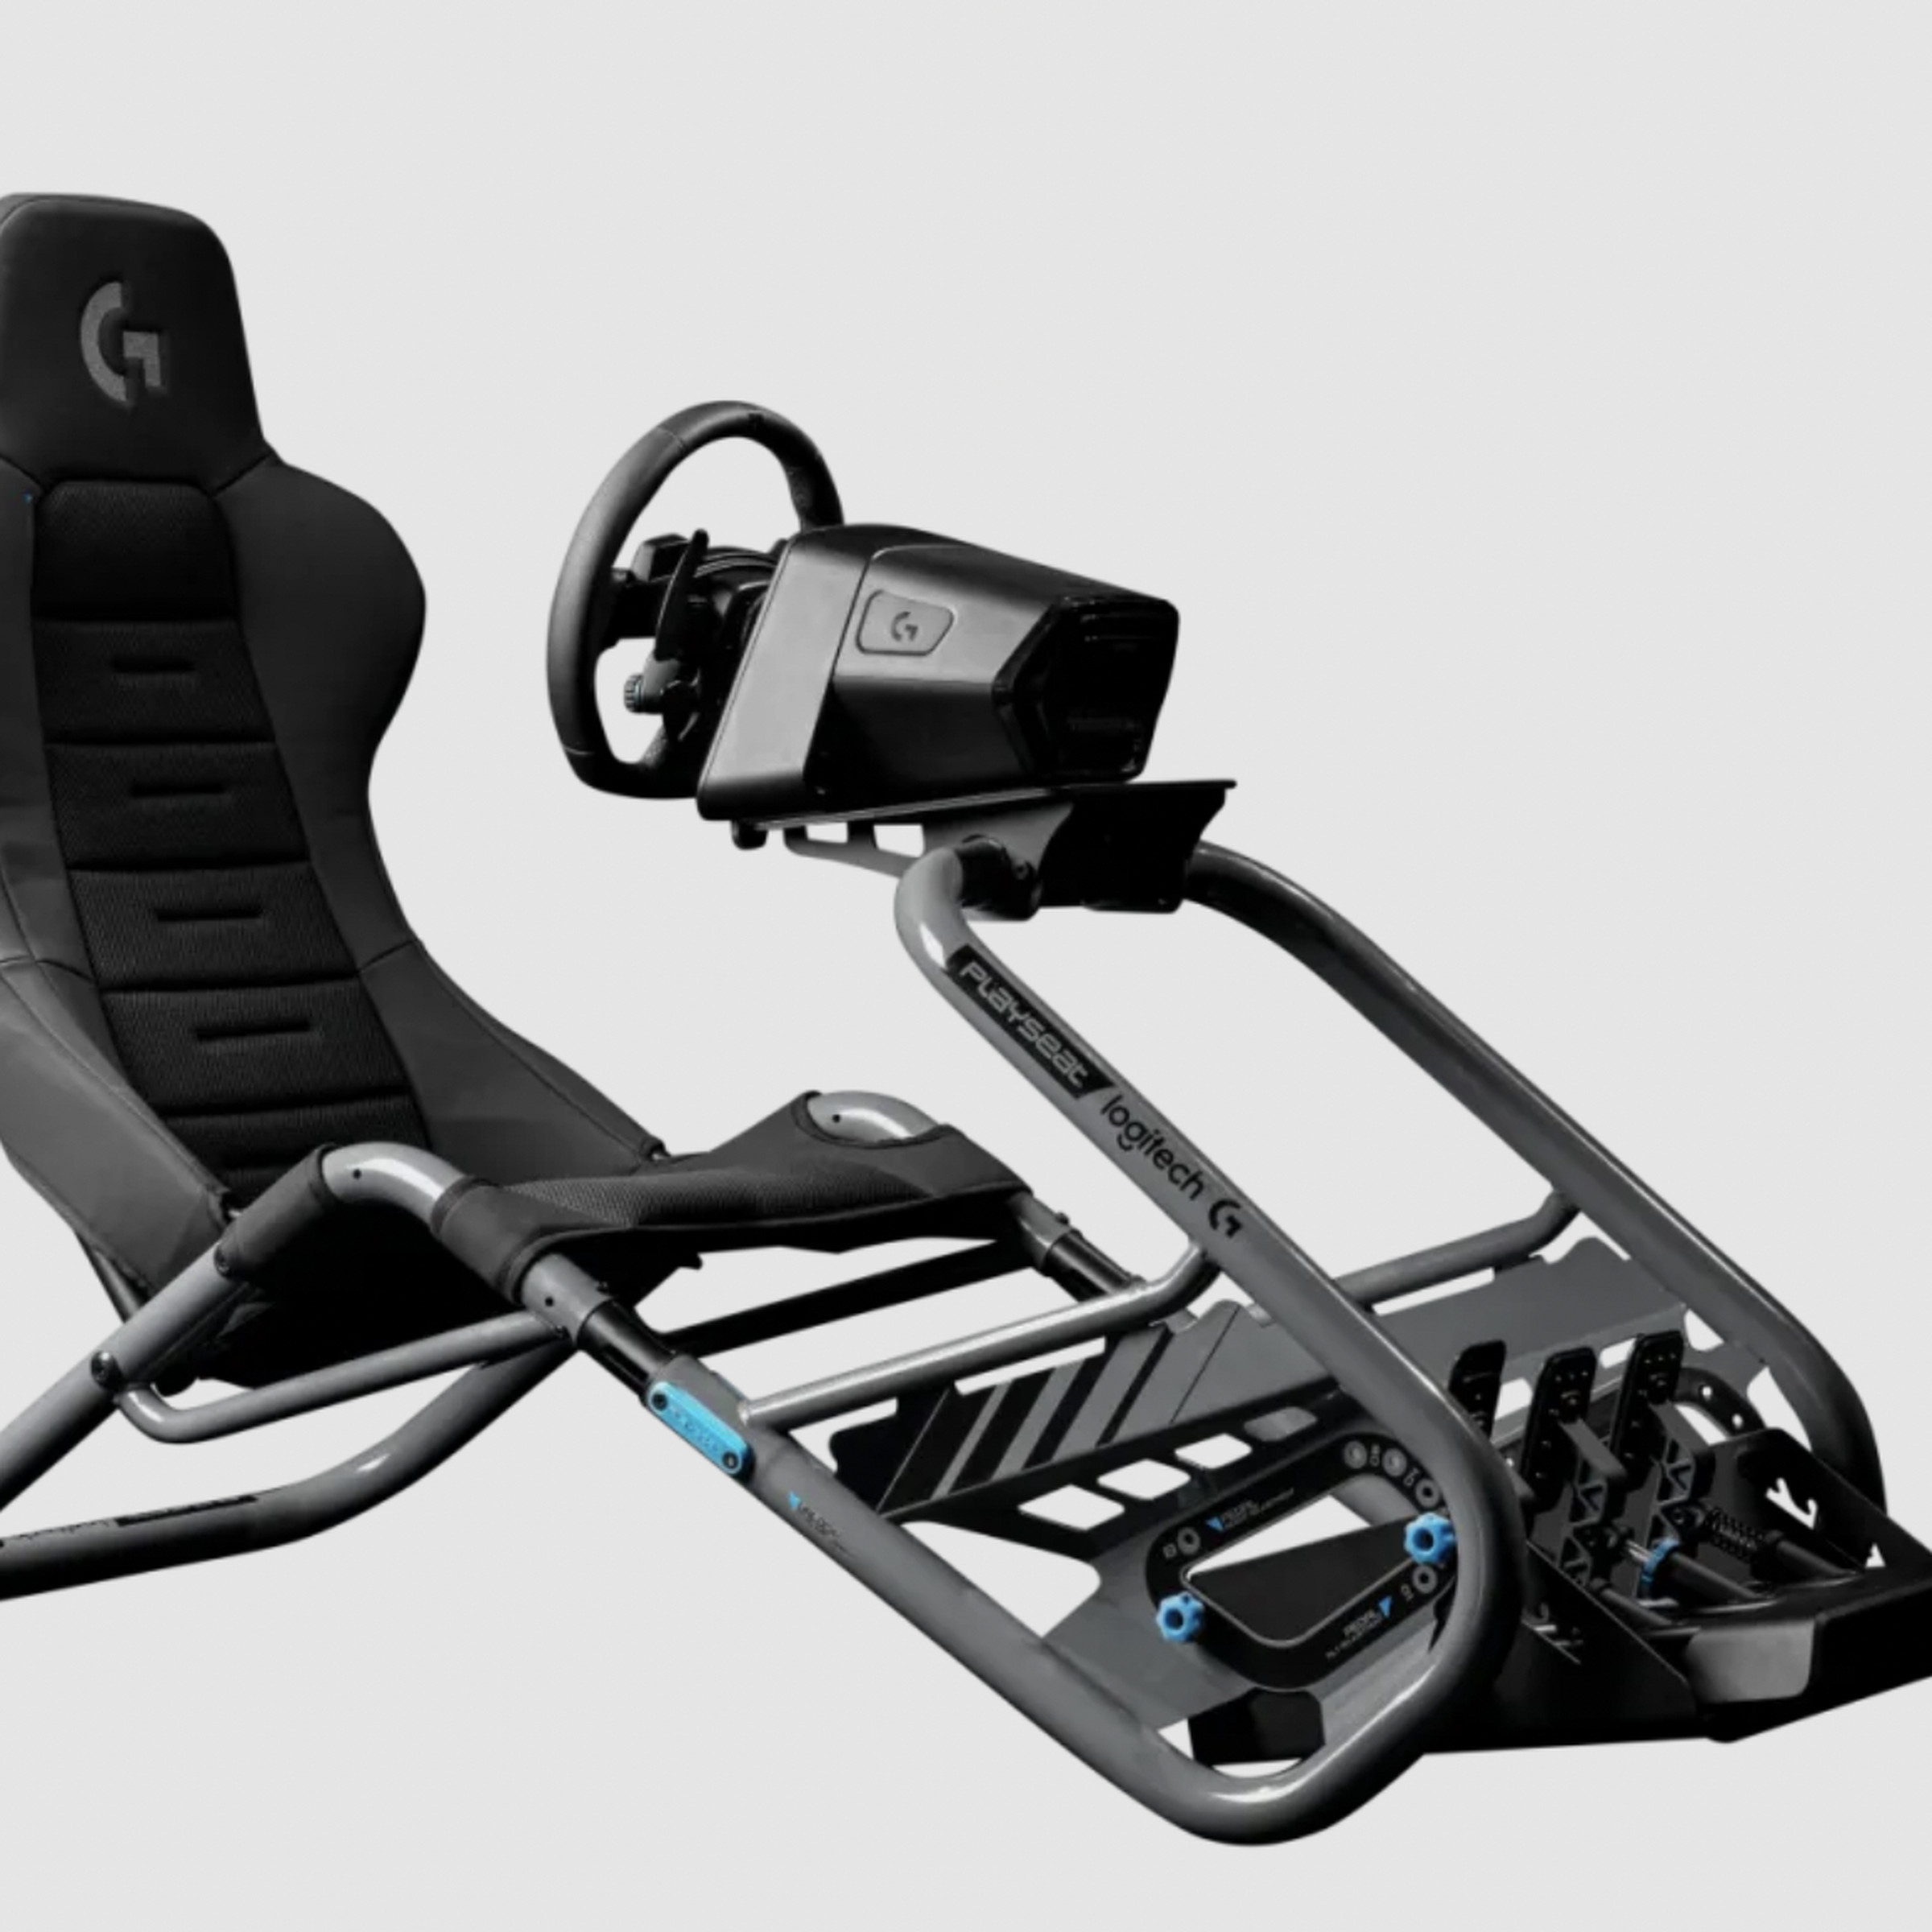 An image showing Logitech and Playseat’s cockpit with a Logitech racing wheel